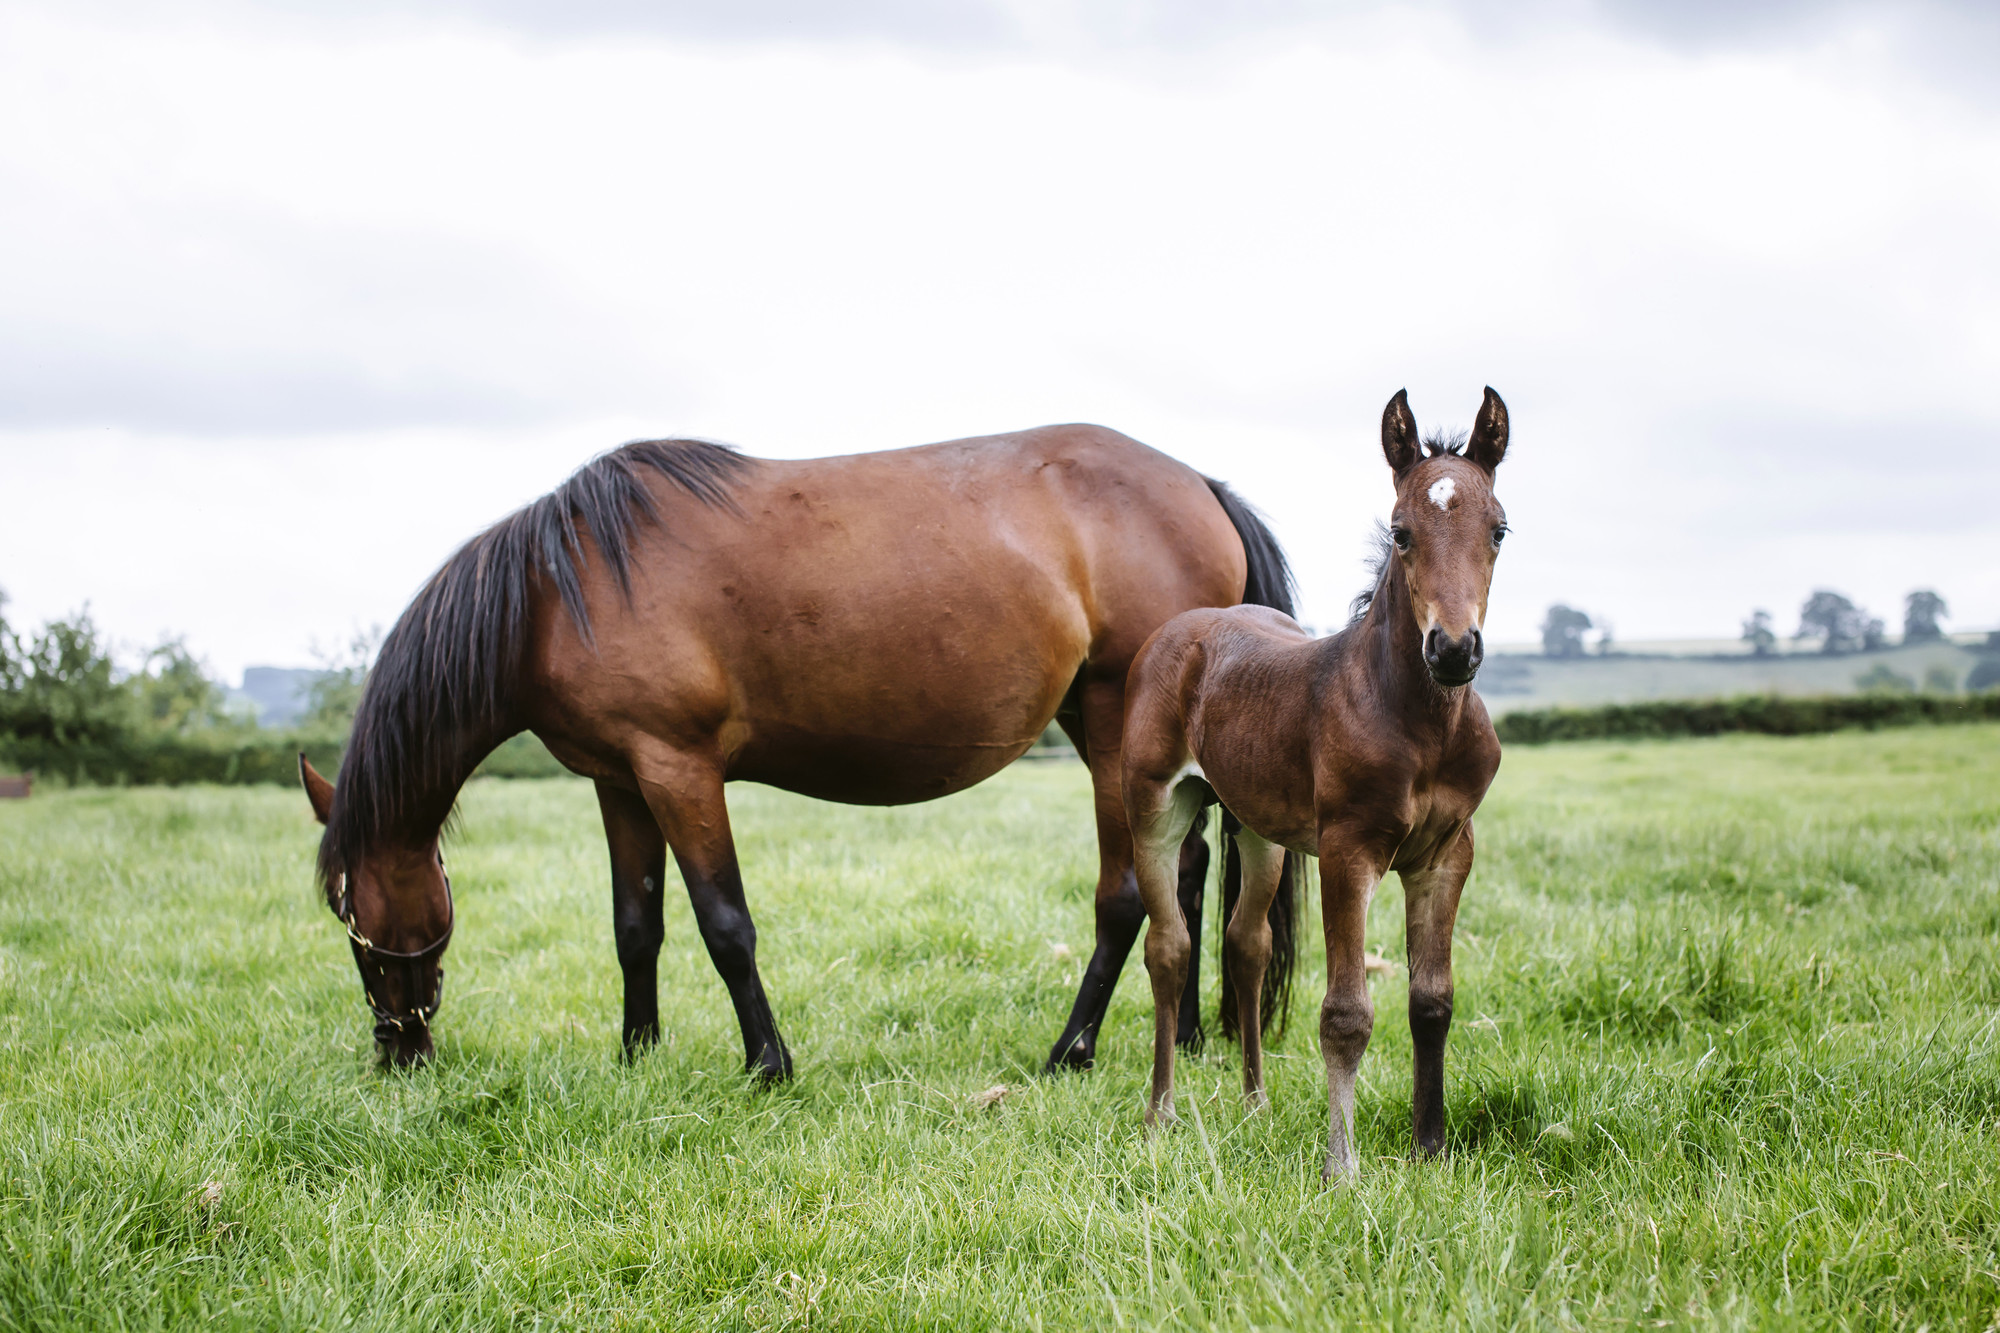 Horse grazing with foal in a field 